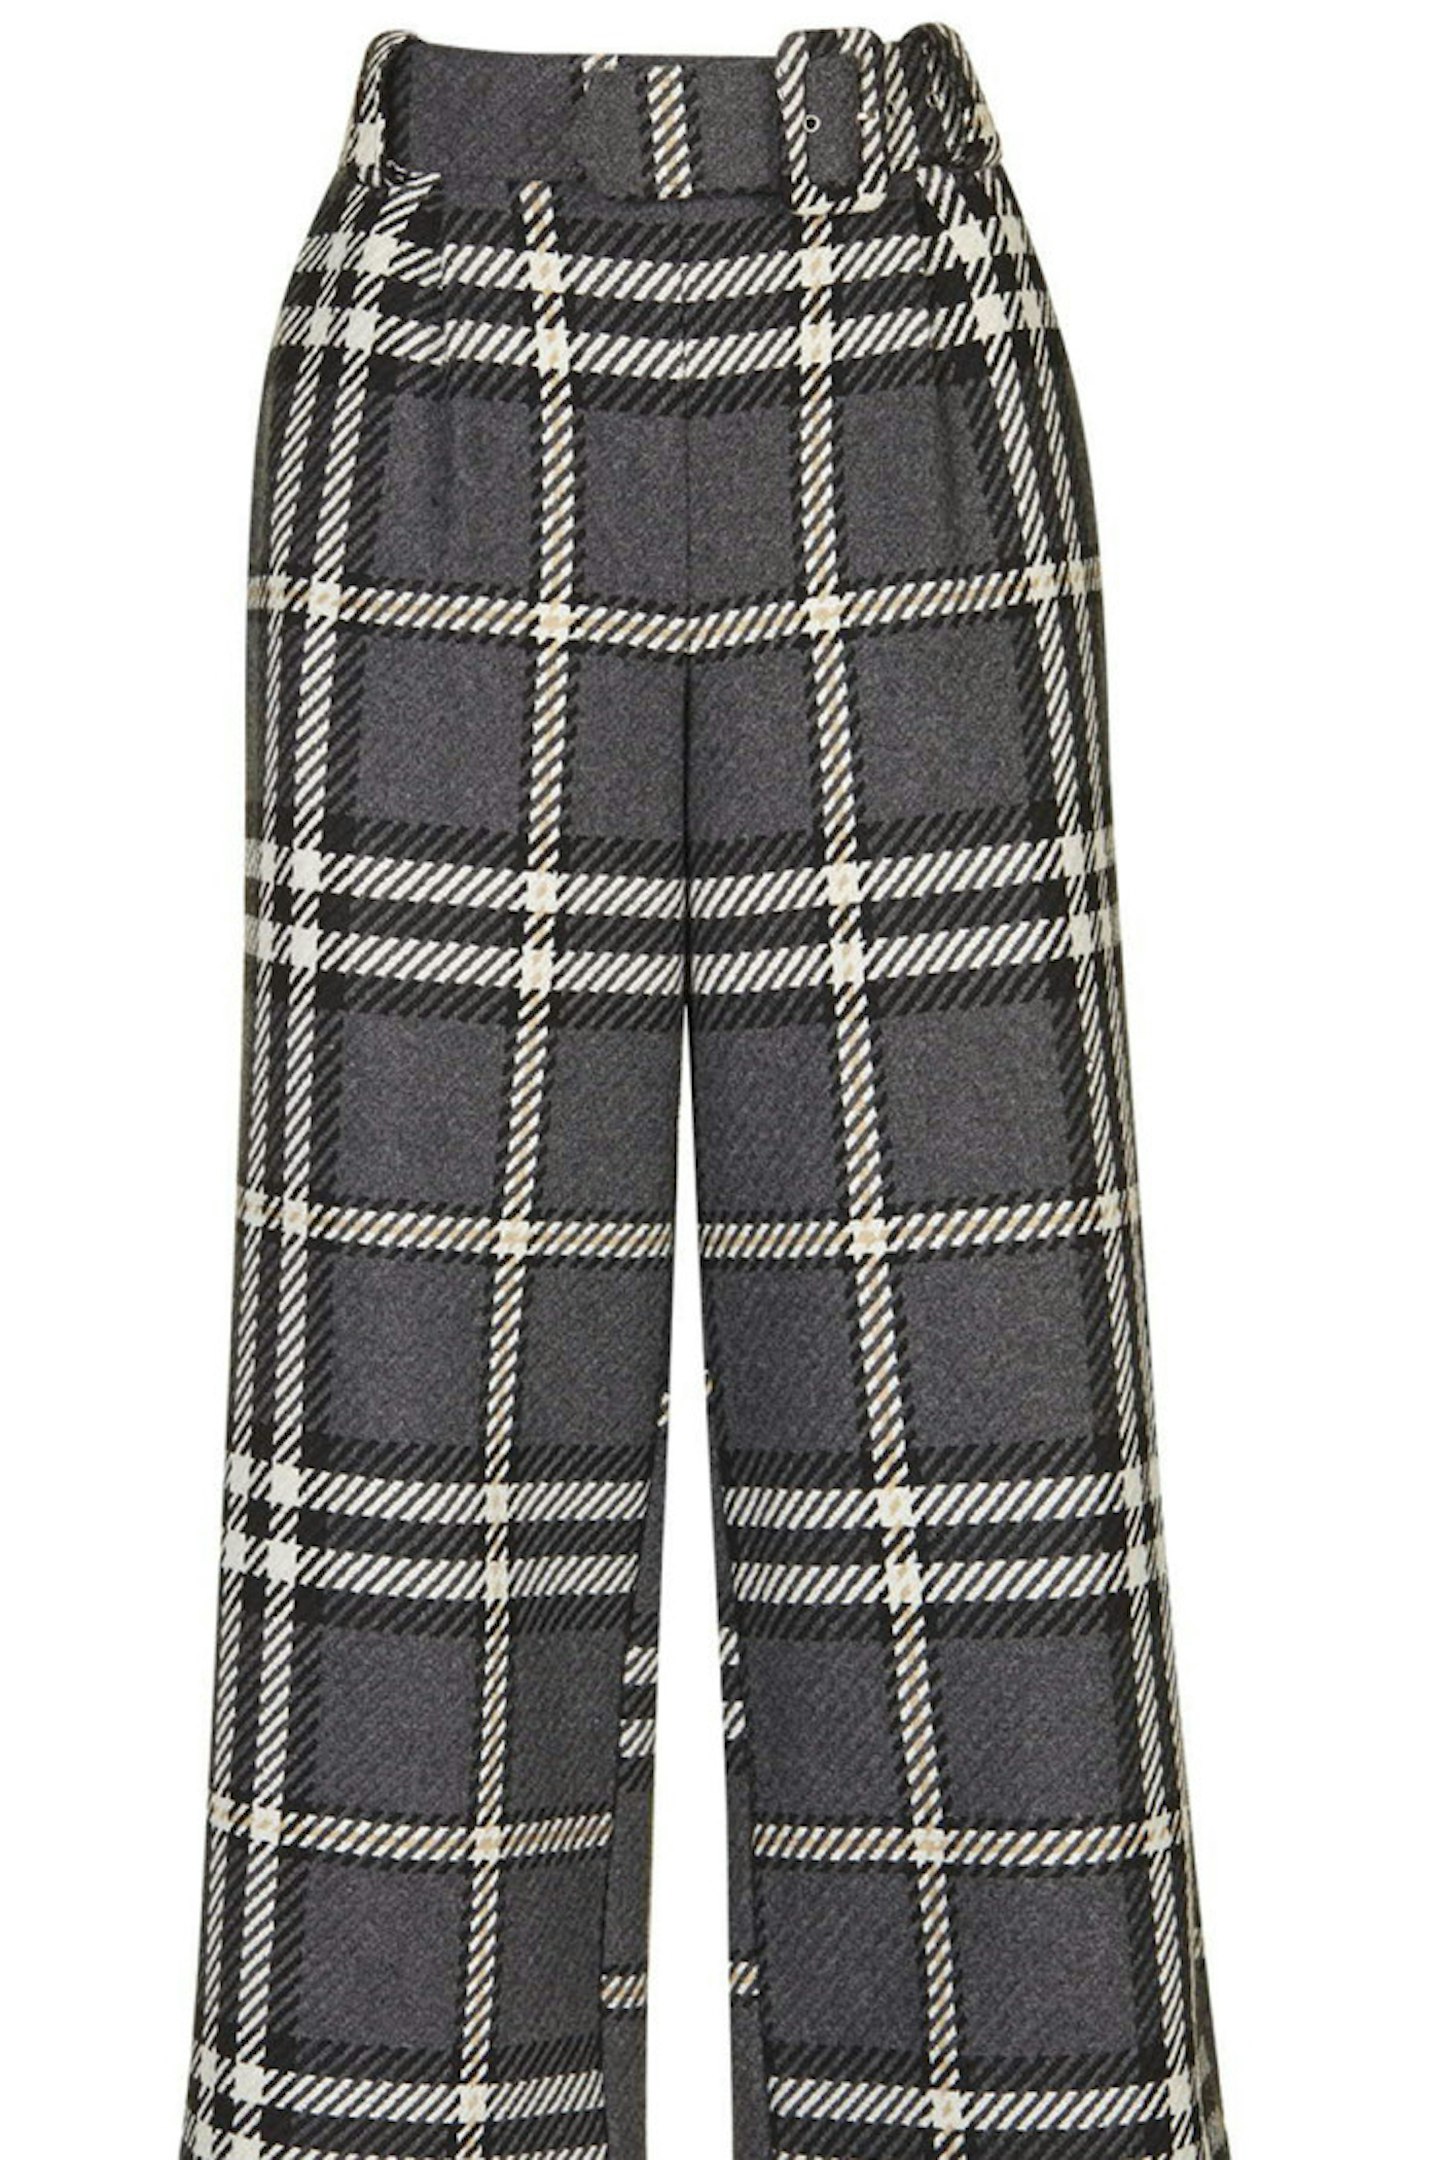 Highland Style: The Best Tartan Pieces We've Found On The High Street